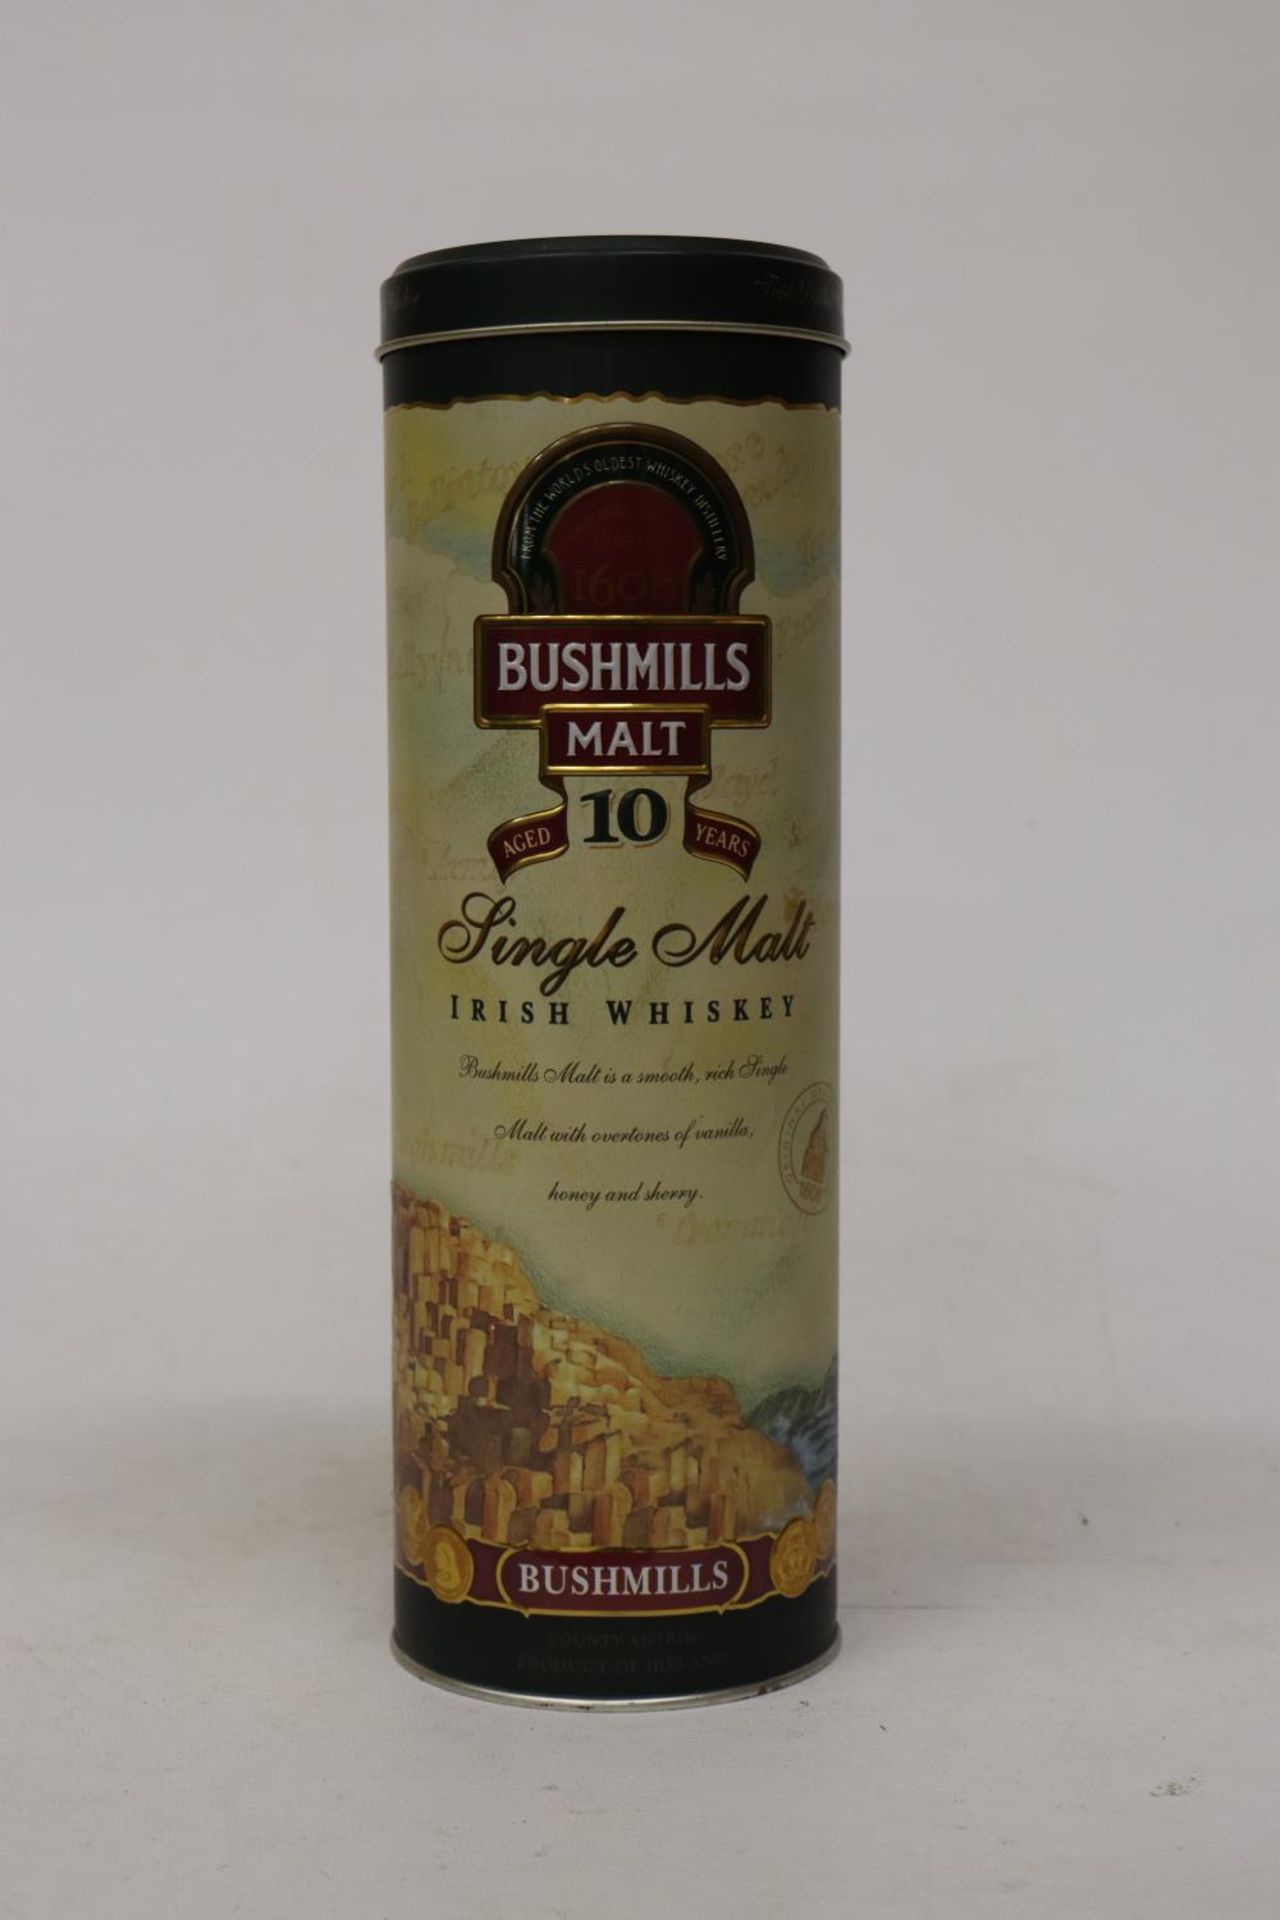 A BOTTLE OF BUSHMILLS 10 YEAR OLD MALT WHISKY, BOXED - Image 2 of 5